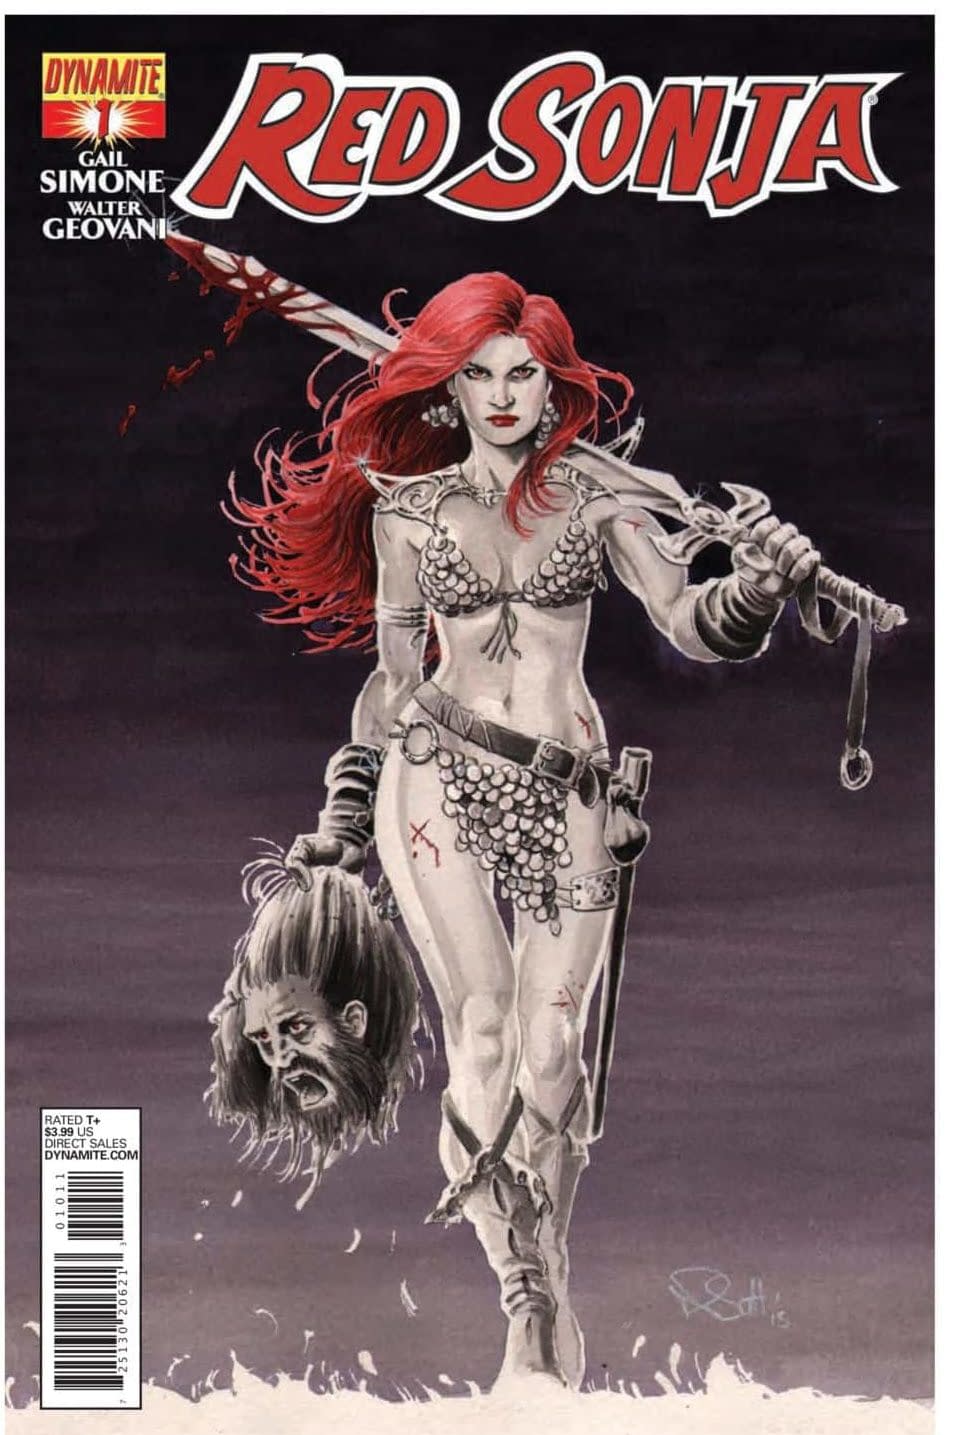 Bryan Singer's Red Sonja Adaptation is No Longer "On the Slate"